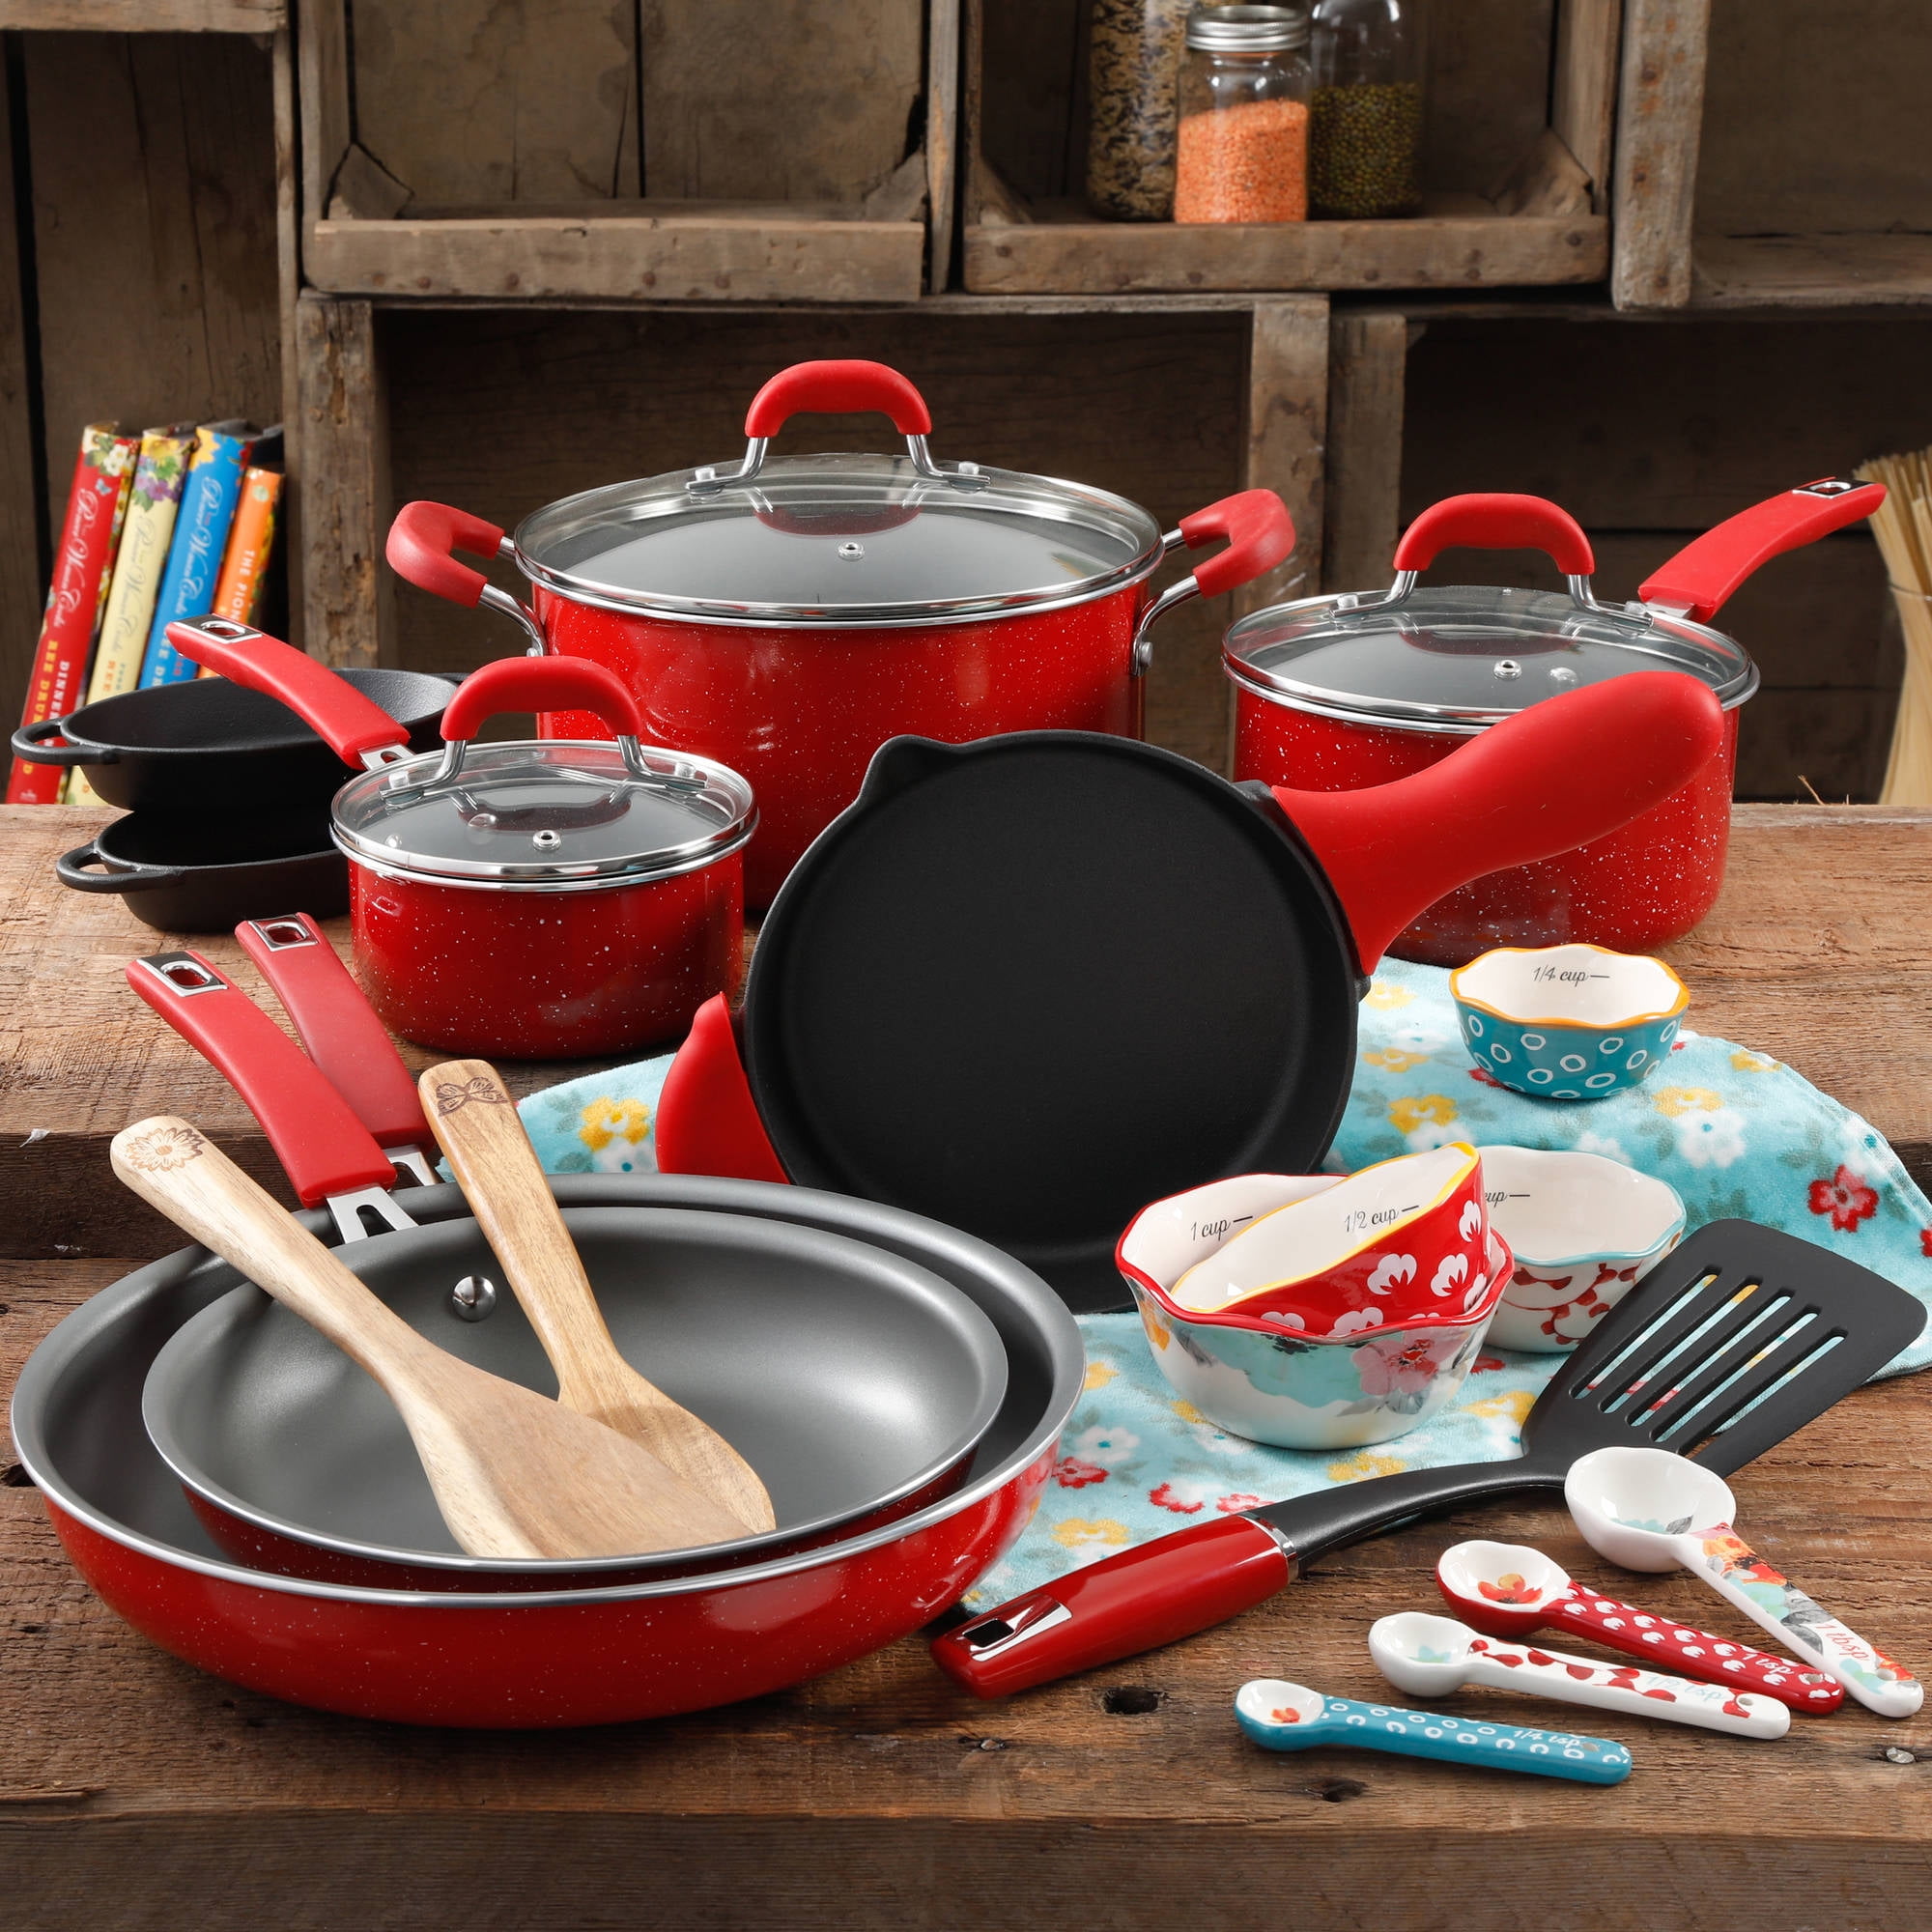 The Pioneer Woman Vintage Speckle 24-Piece Cookware Combo Set in Turquoise Bundle with Copper Charm Stainless Steel Copper Bottom Cookware Set, 10